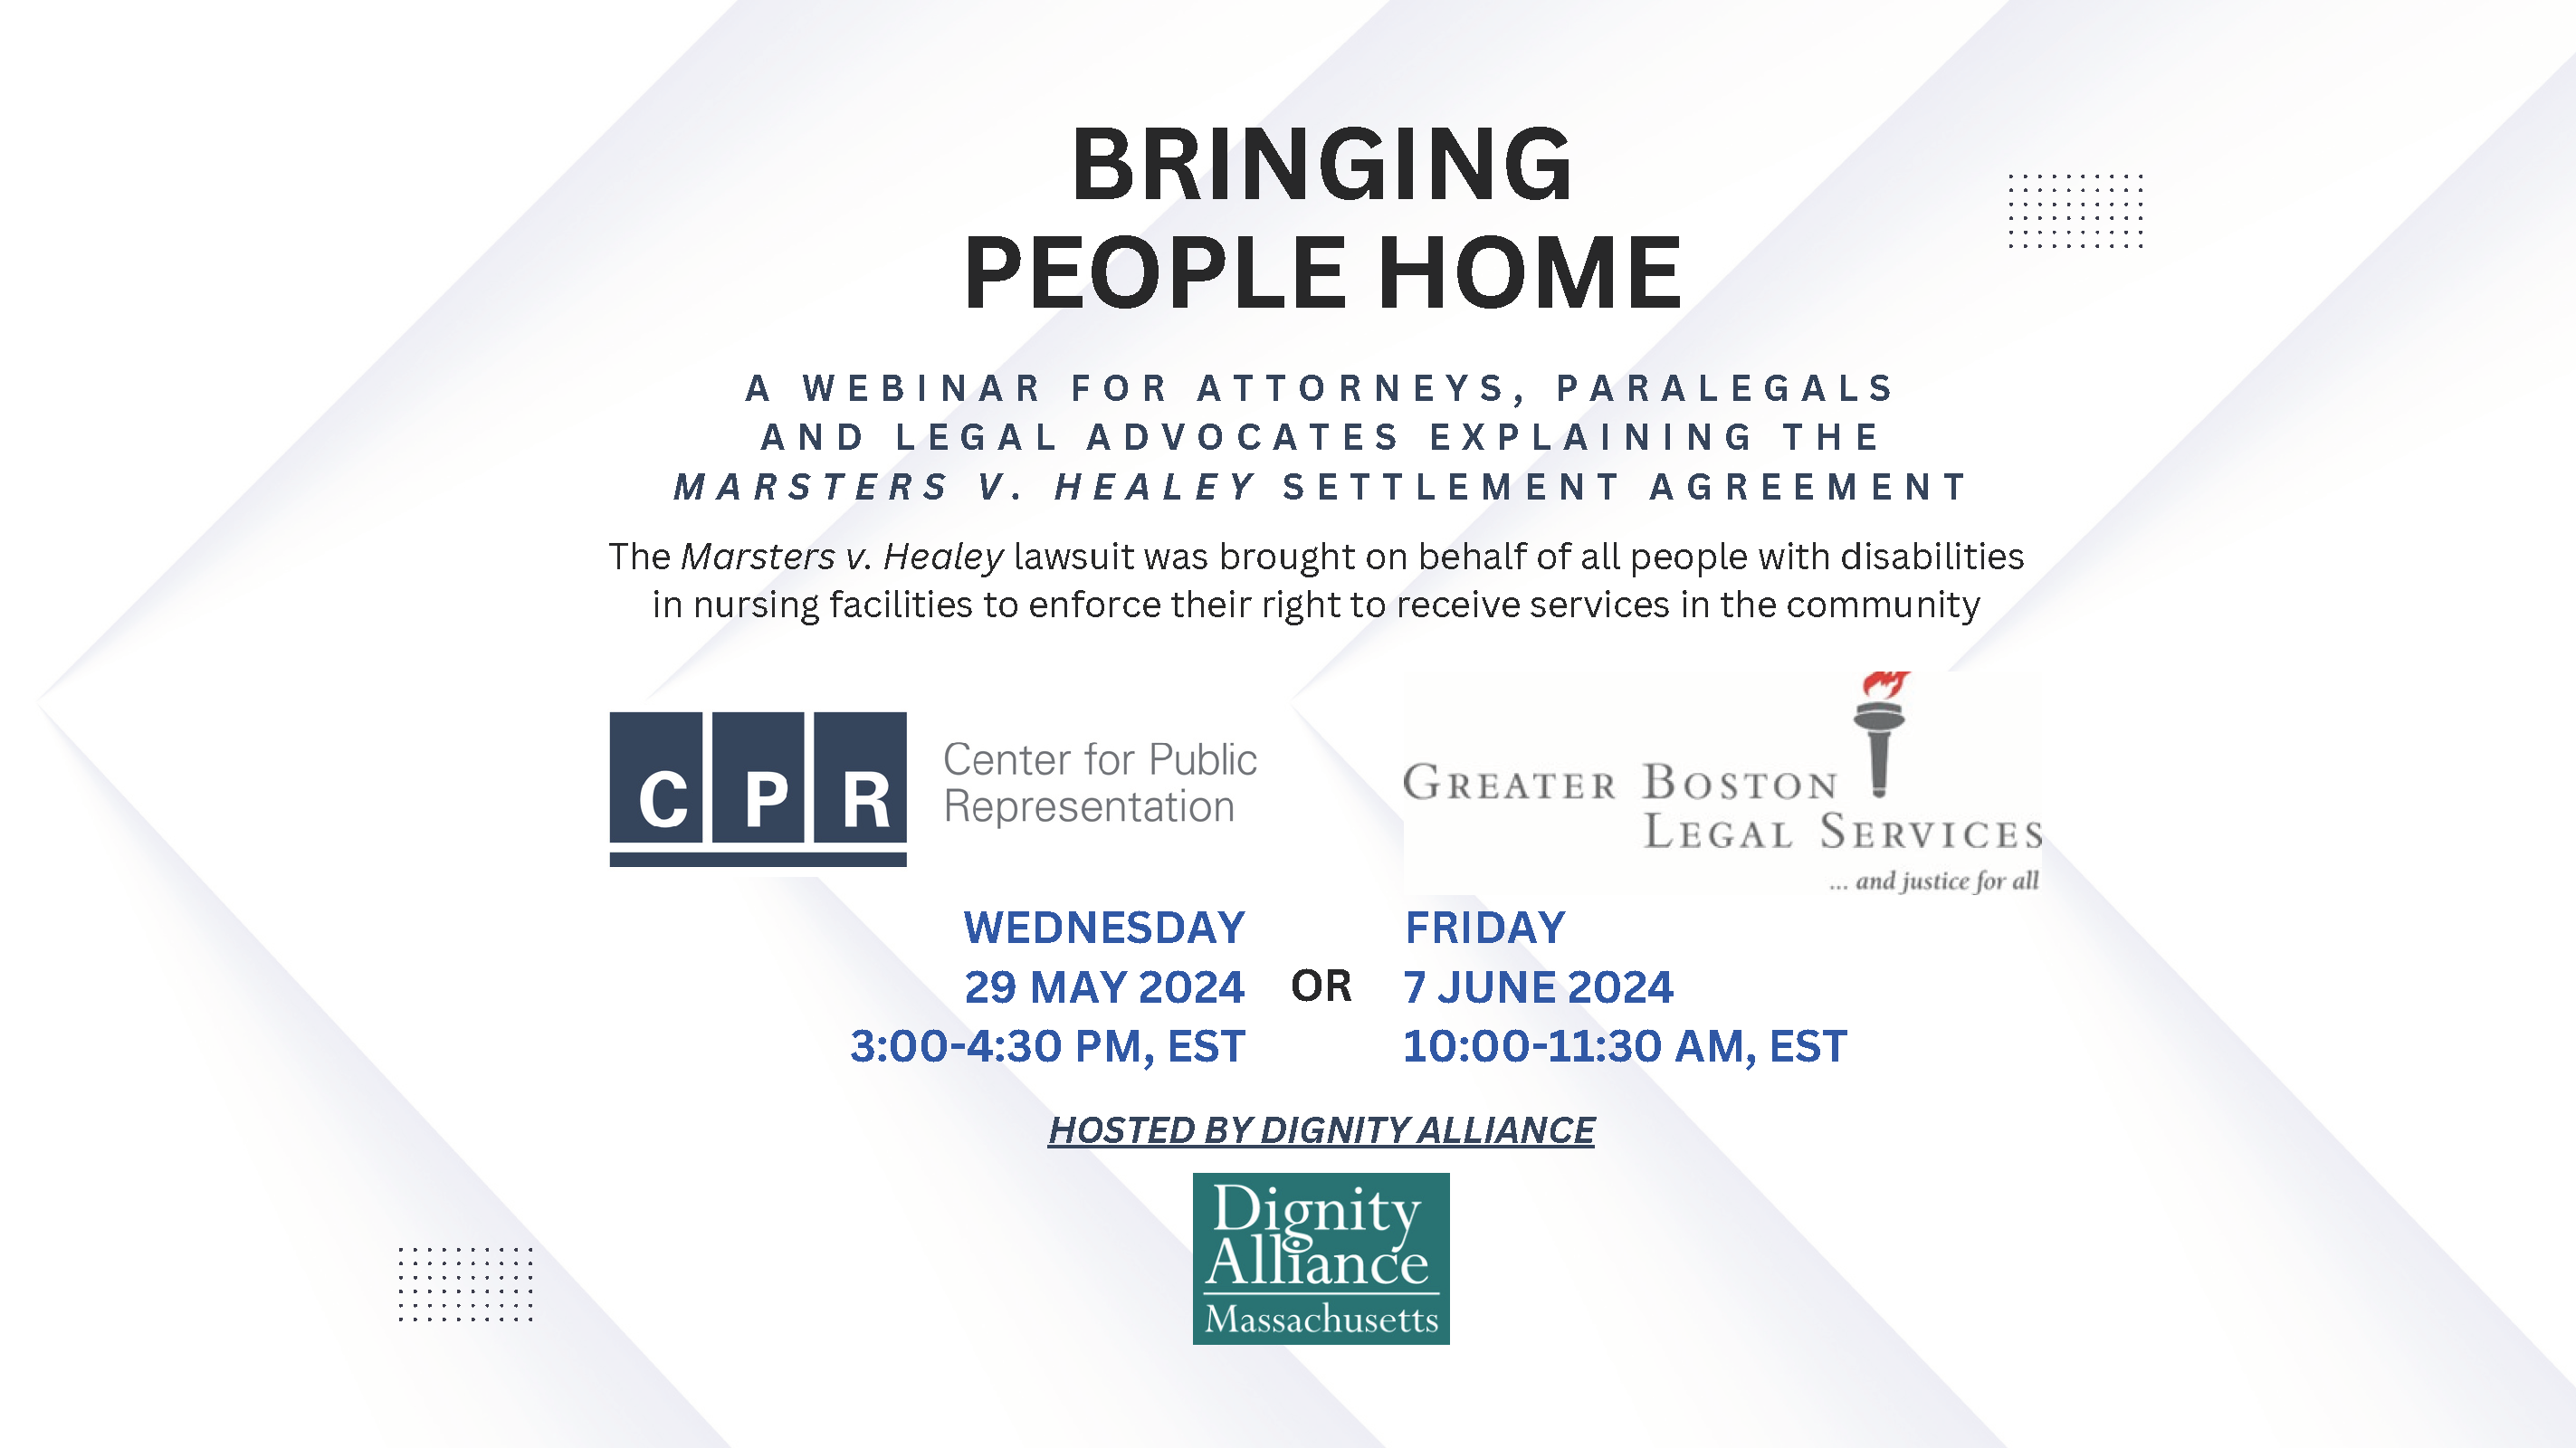 Bringing People Home, A webinar for attorneys, paralegals, and legal advocates
explaining the Marsters v. Healey Settlement Agreement. May 29th 3-4:30 pm, est or June 7, 10-11:30 am, est. CPR and GBLS logos. Hosted by Dignity Alliance
